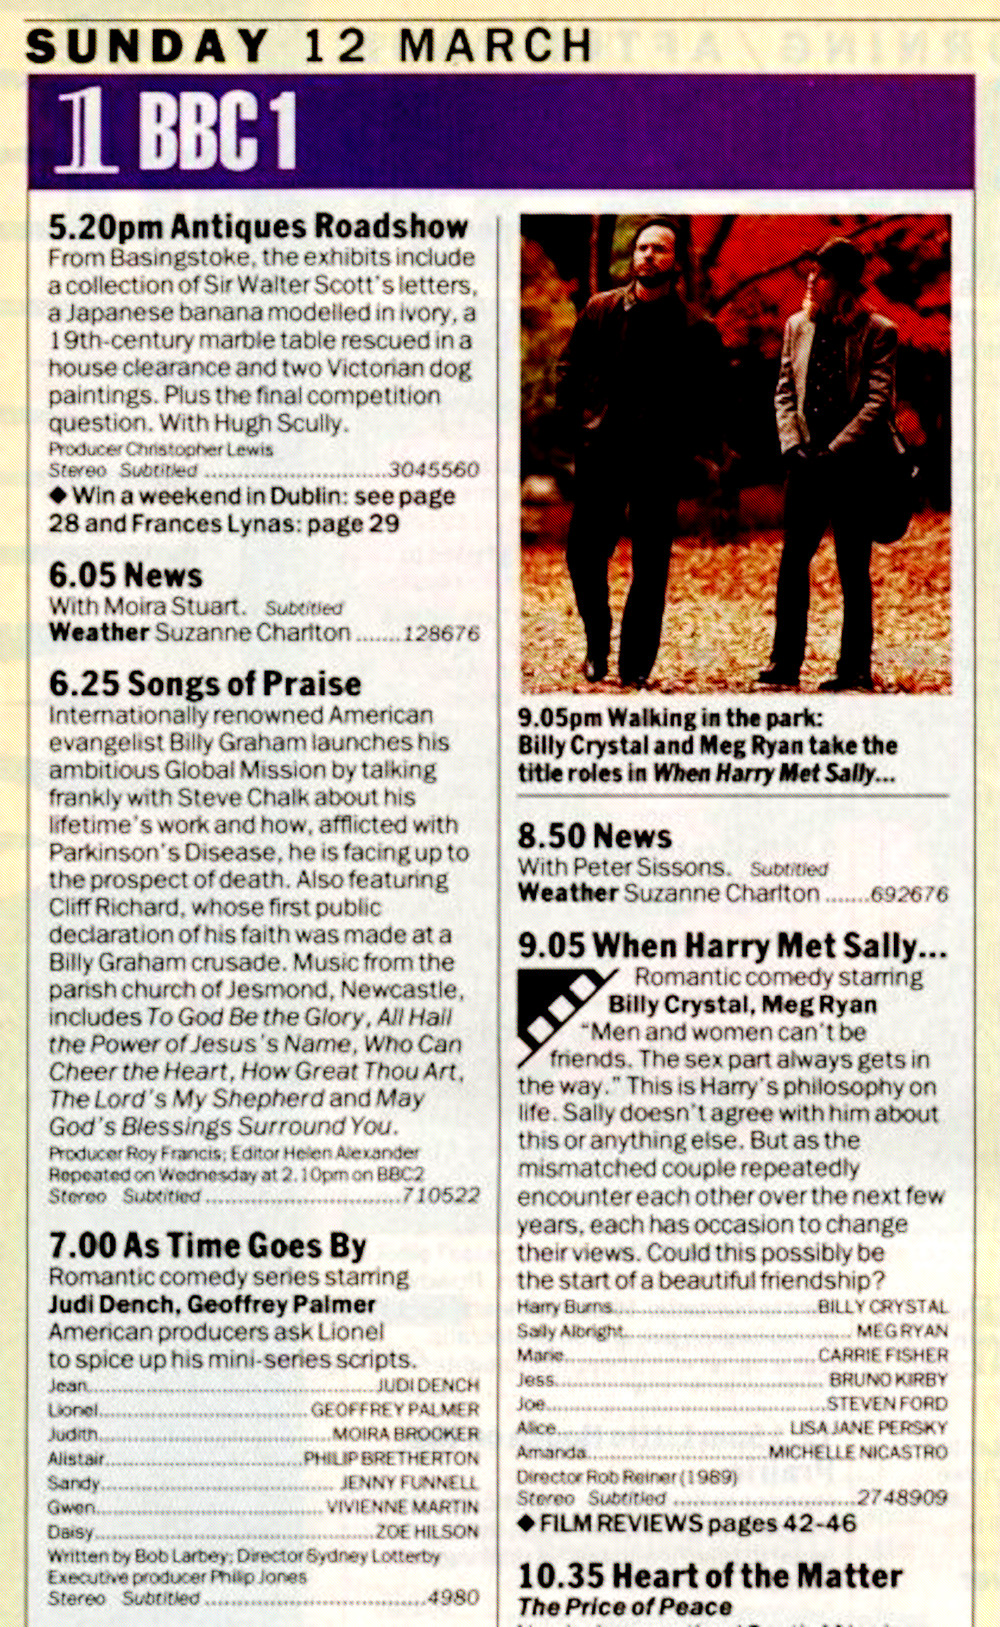 Radio Times listing for 12th March - again, all relevant information here is repeated in the body text